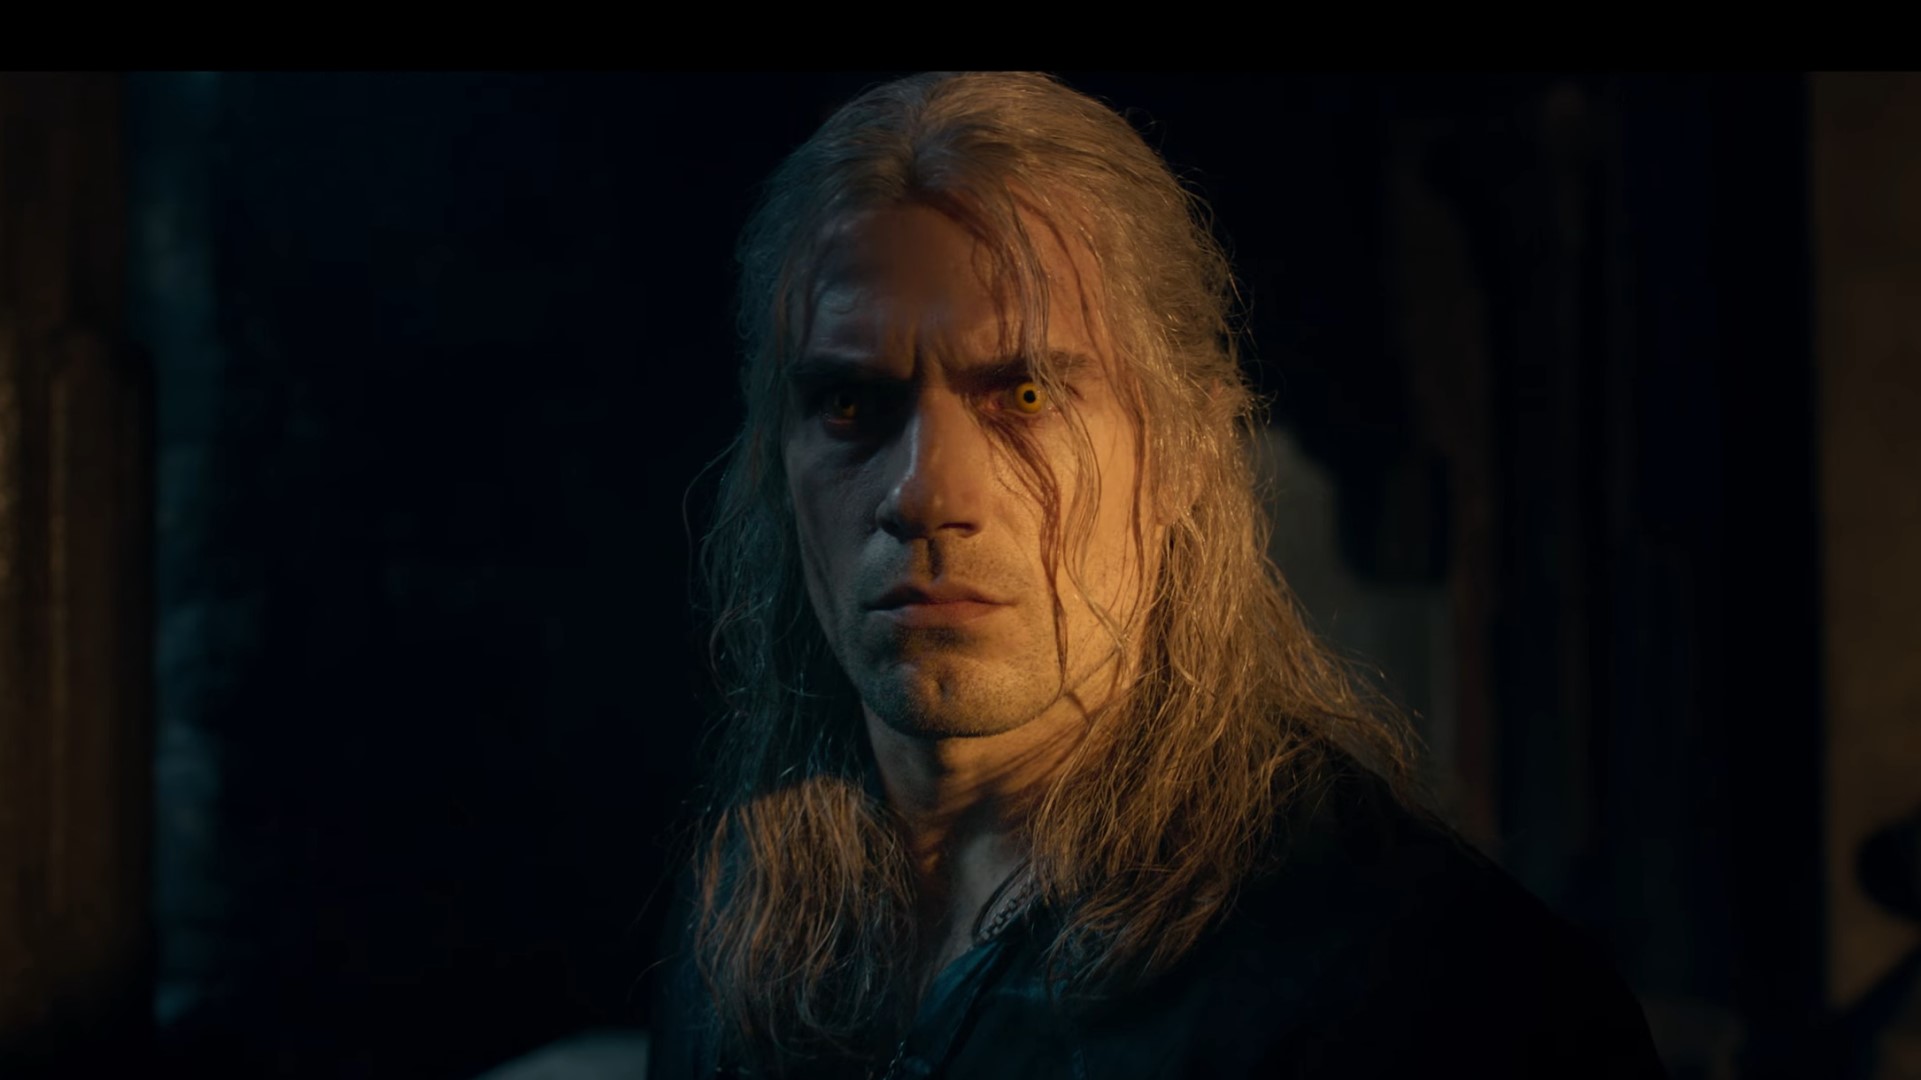 Netflix’s Witcher Season 2 debuts a new trailer full of beasts and battles